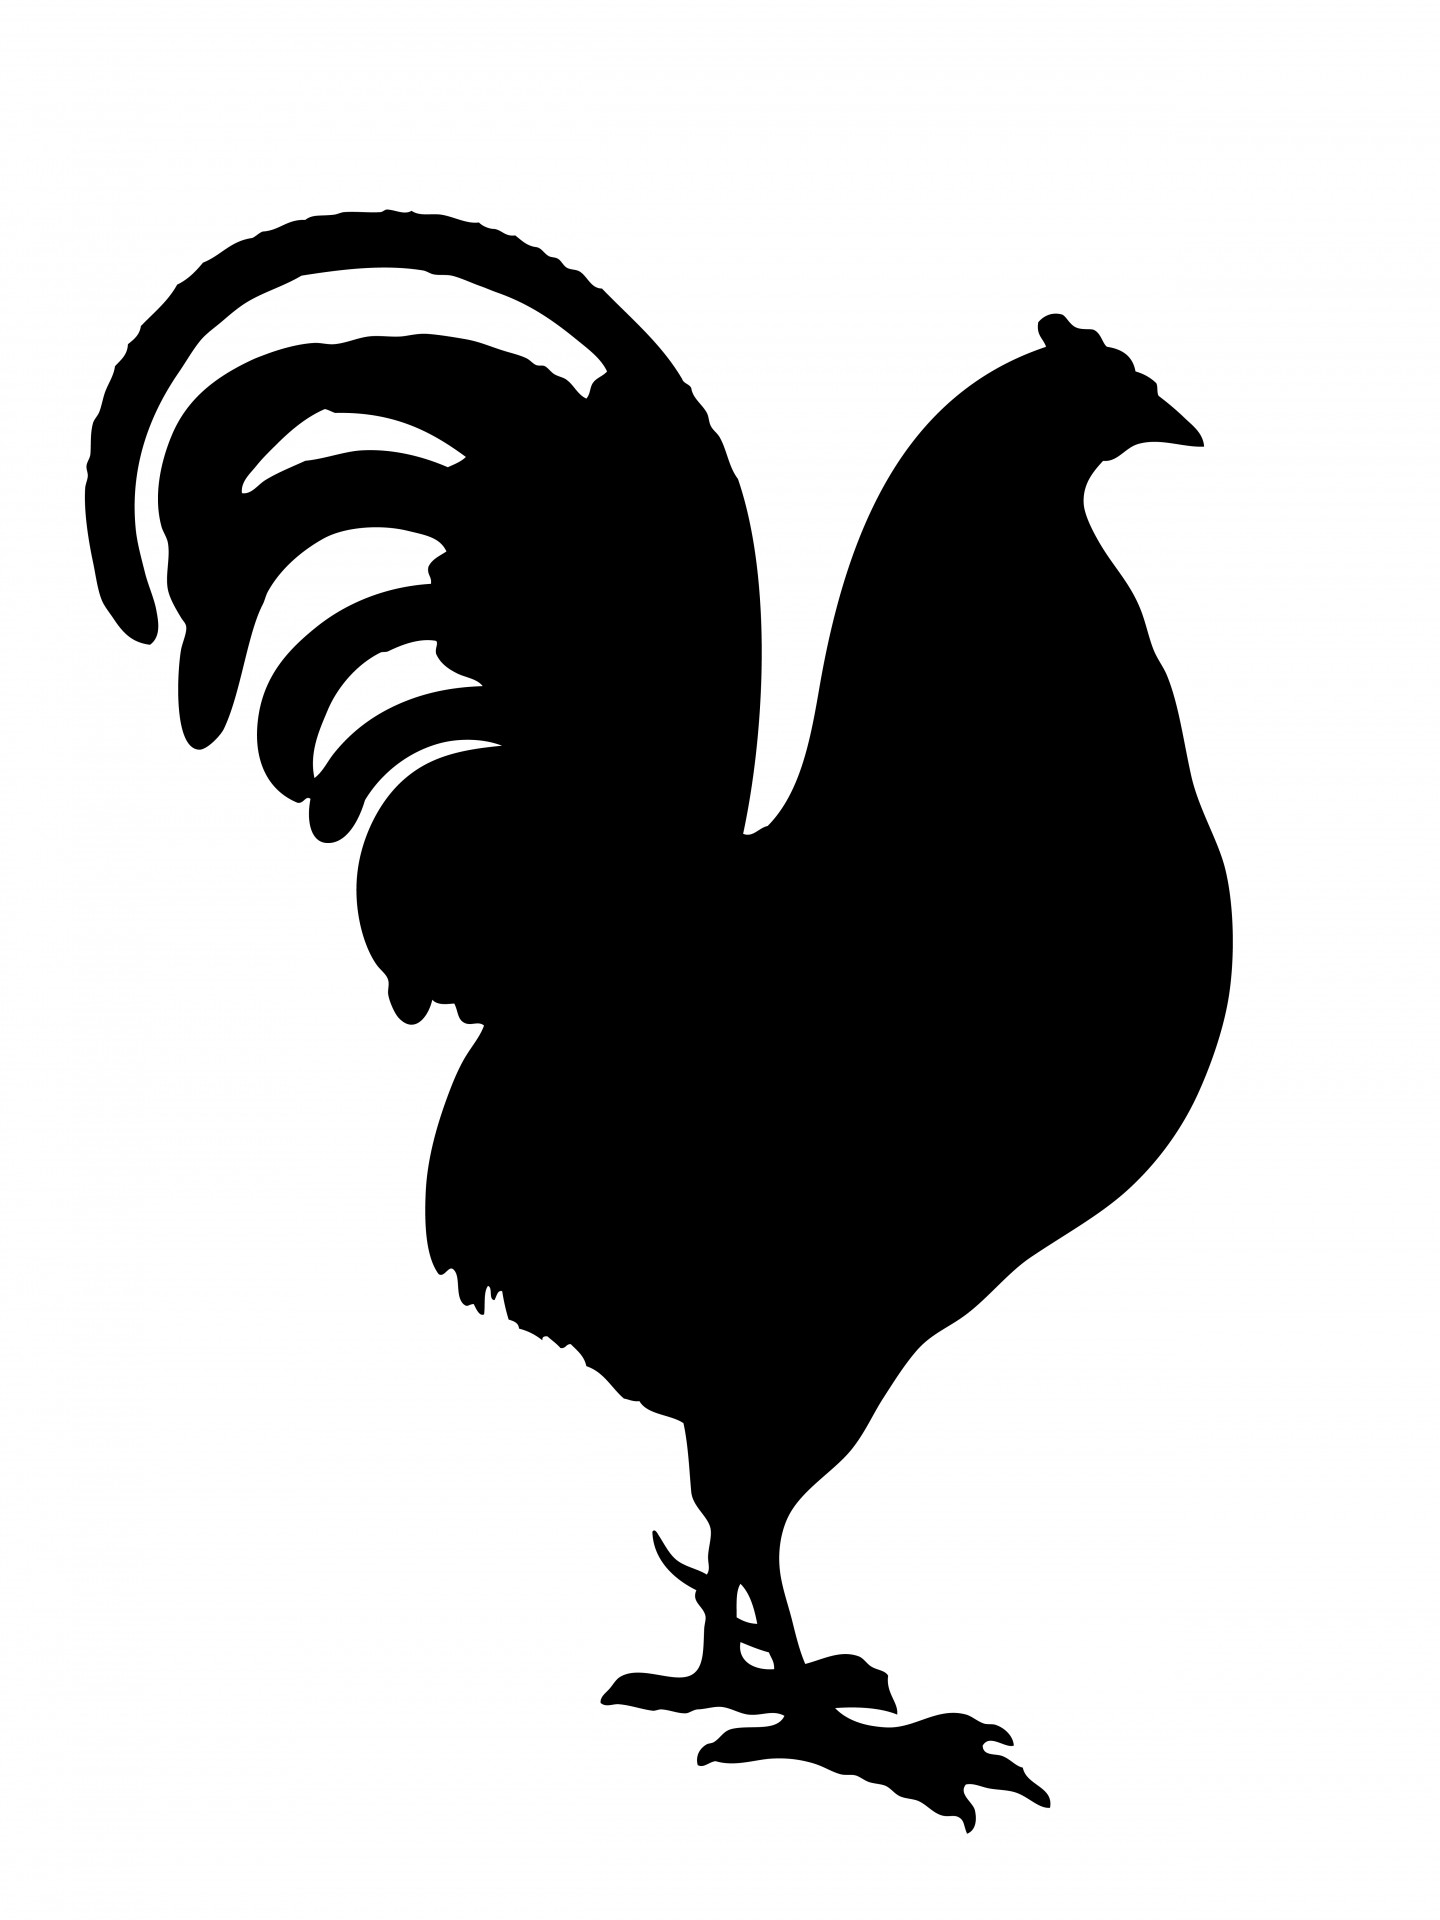 Rooster black silhouette.